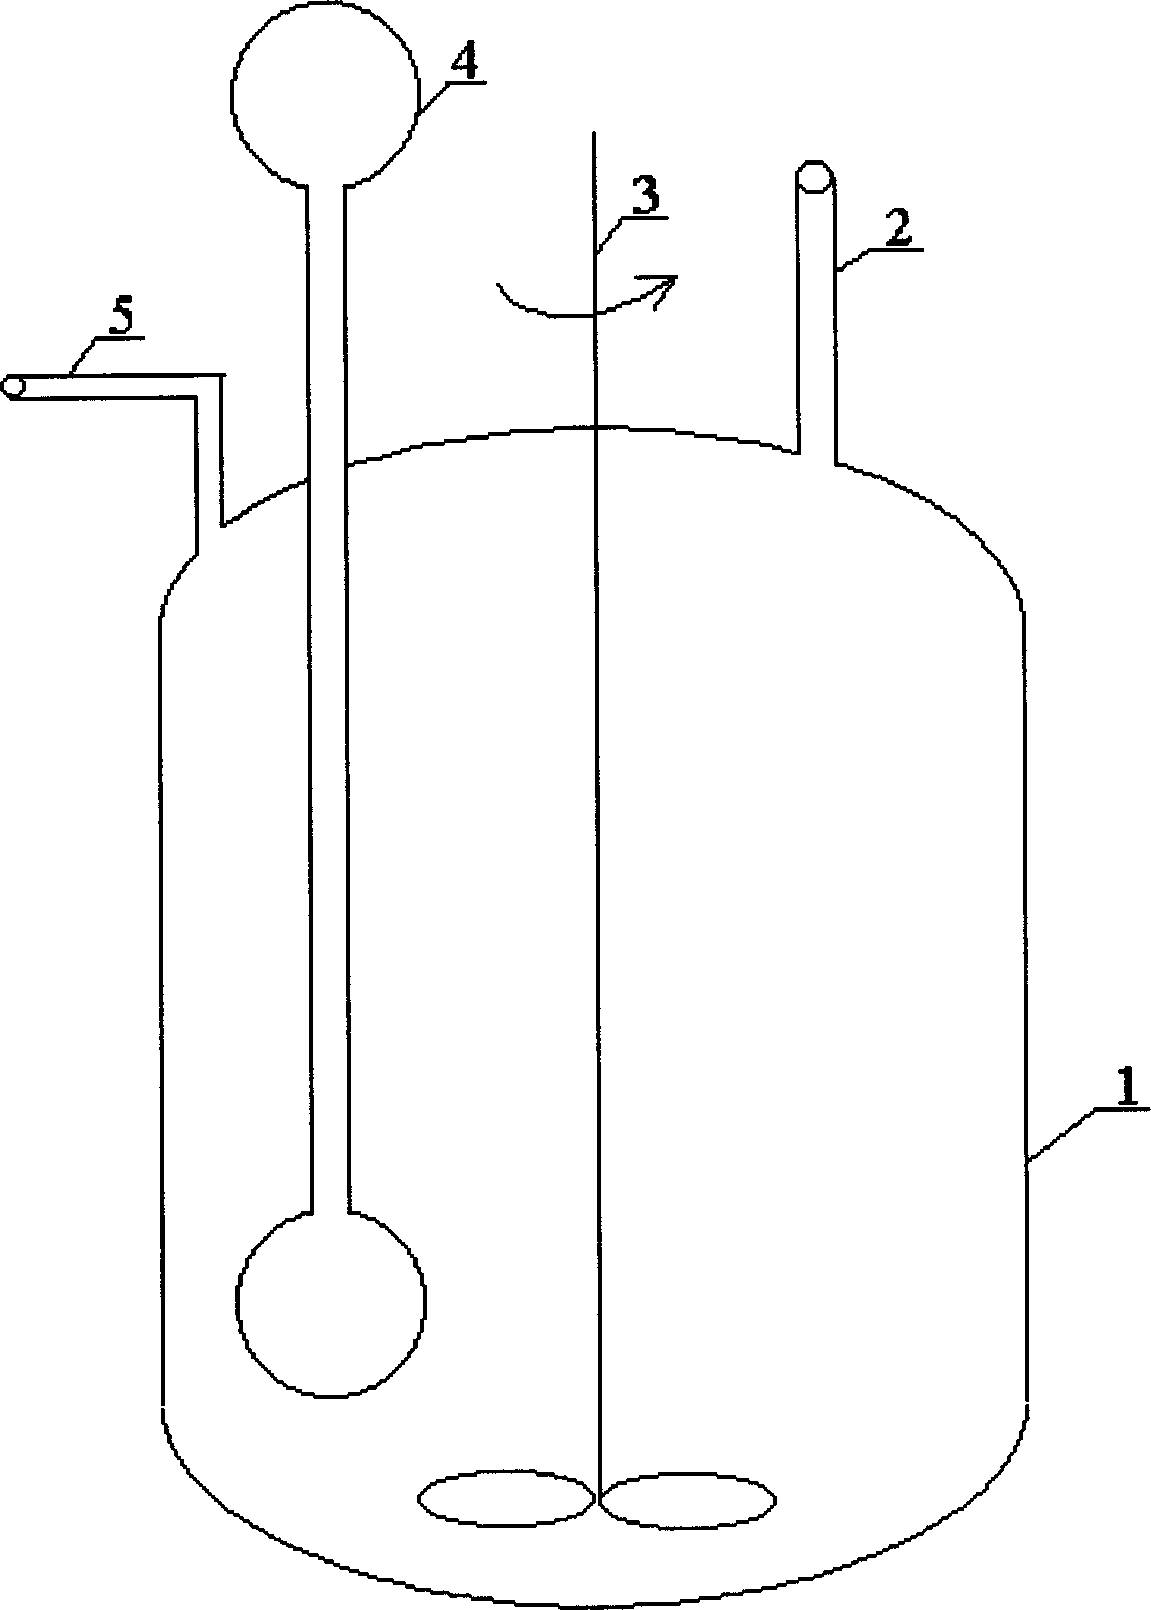 Sodium borohydride catalytic hydrolysis process and reactor of generating hydrogen